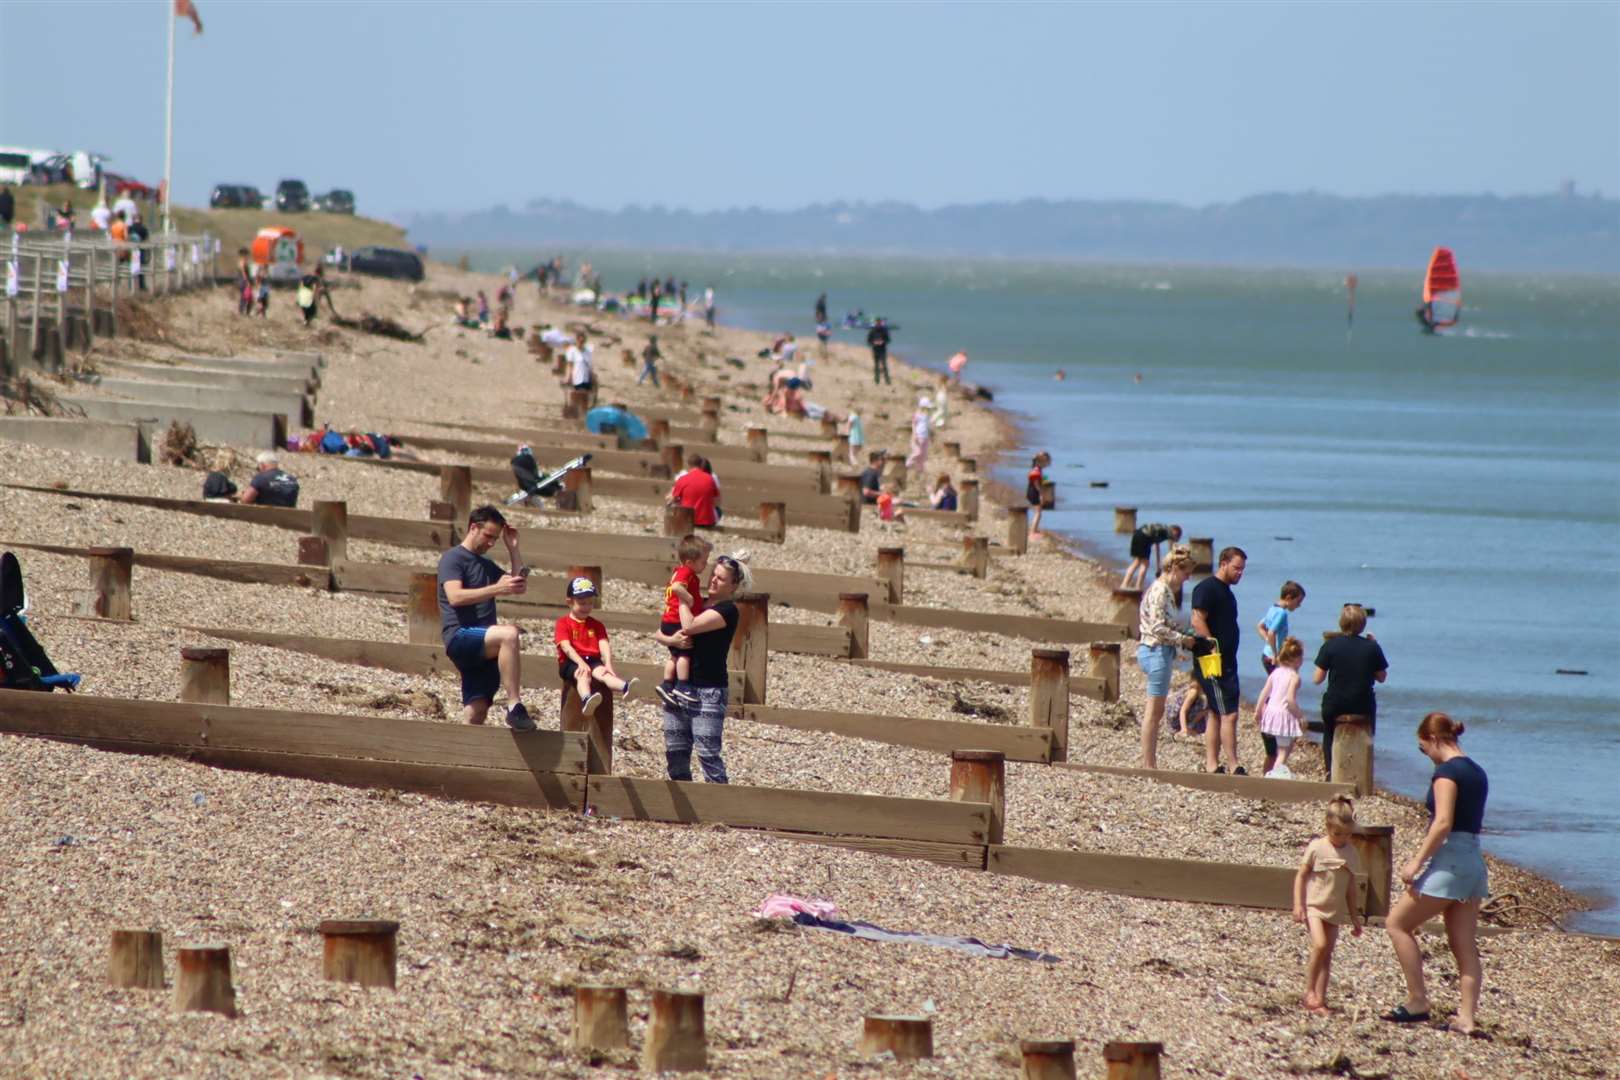 People on the beach at The Leas, Minster, Sheppey - but keeping social distancing during the coronavirus lockdown